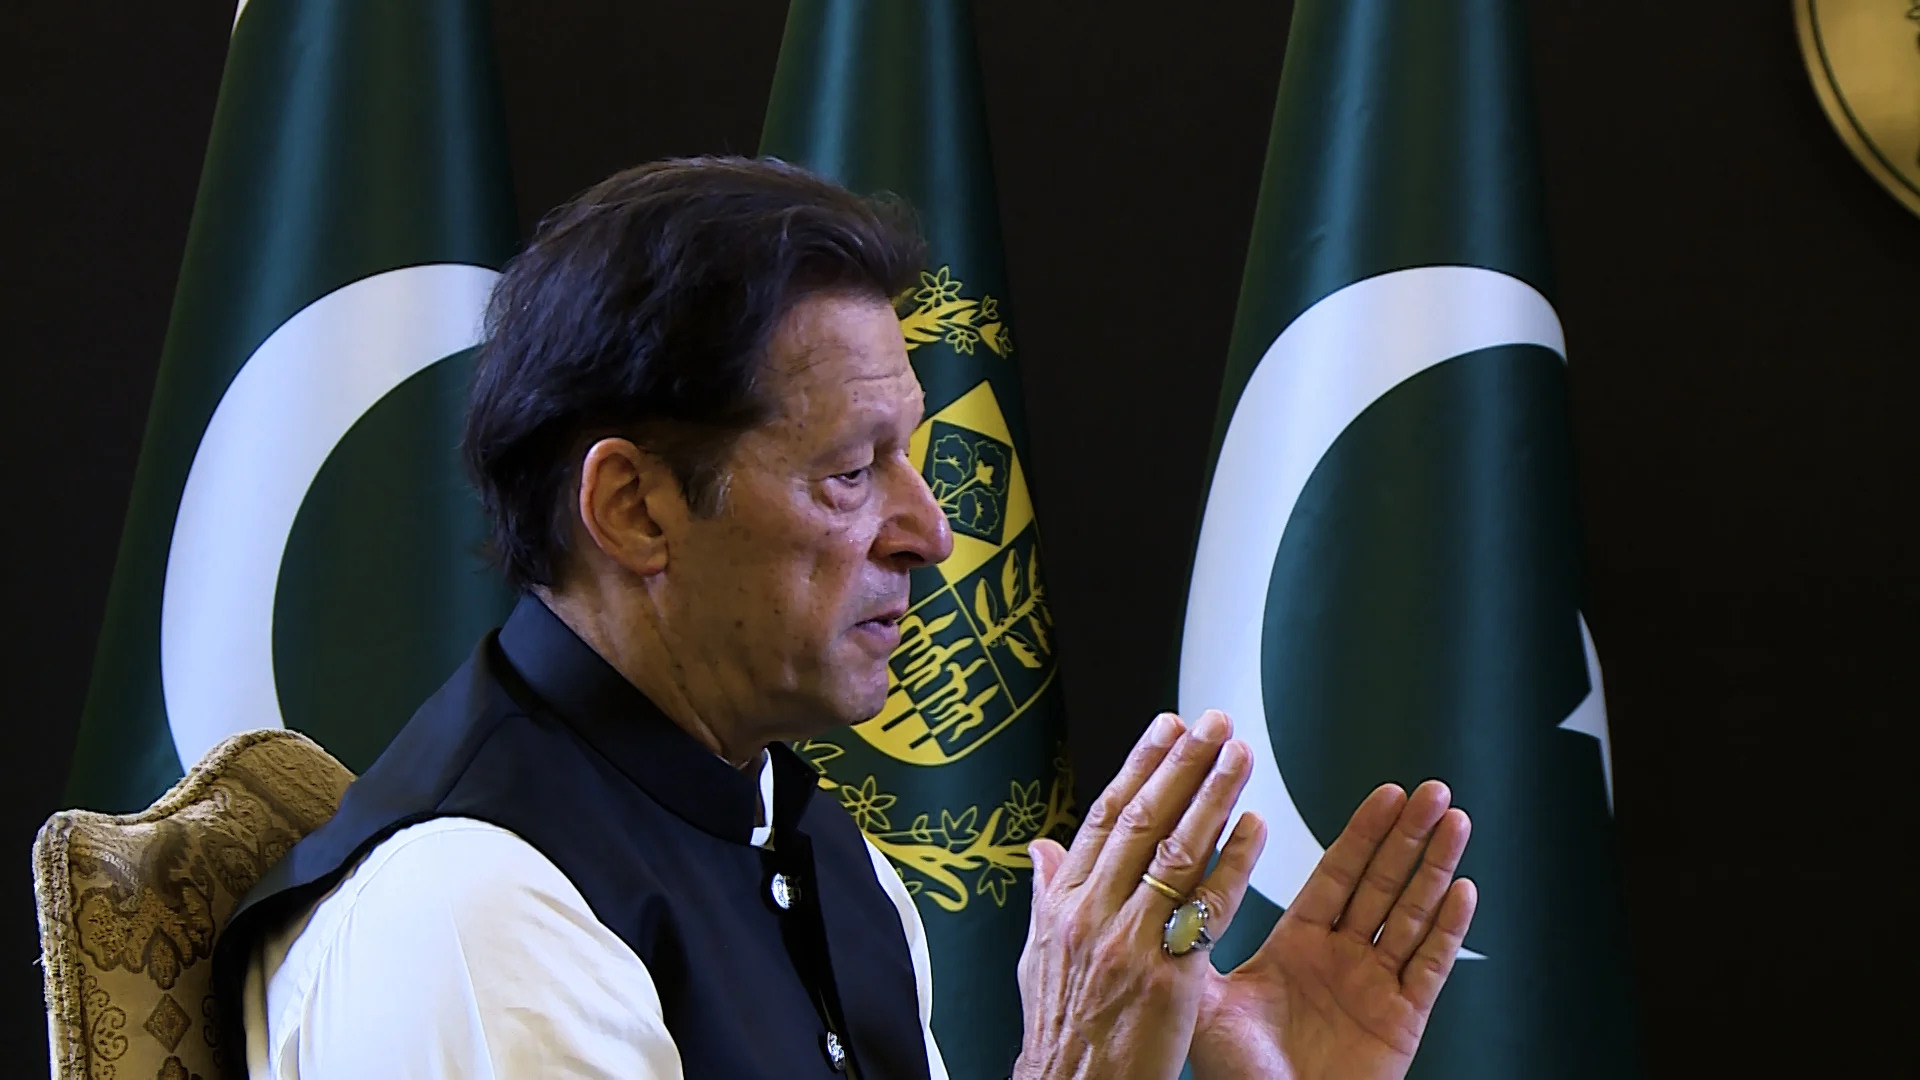 Pakistan Prime Minister Imran Khan Removed from Office